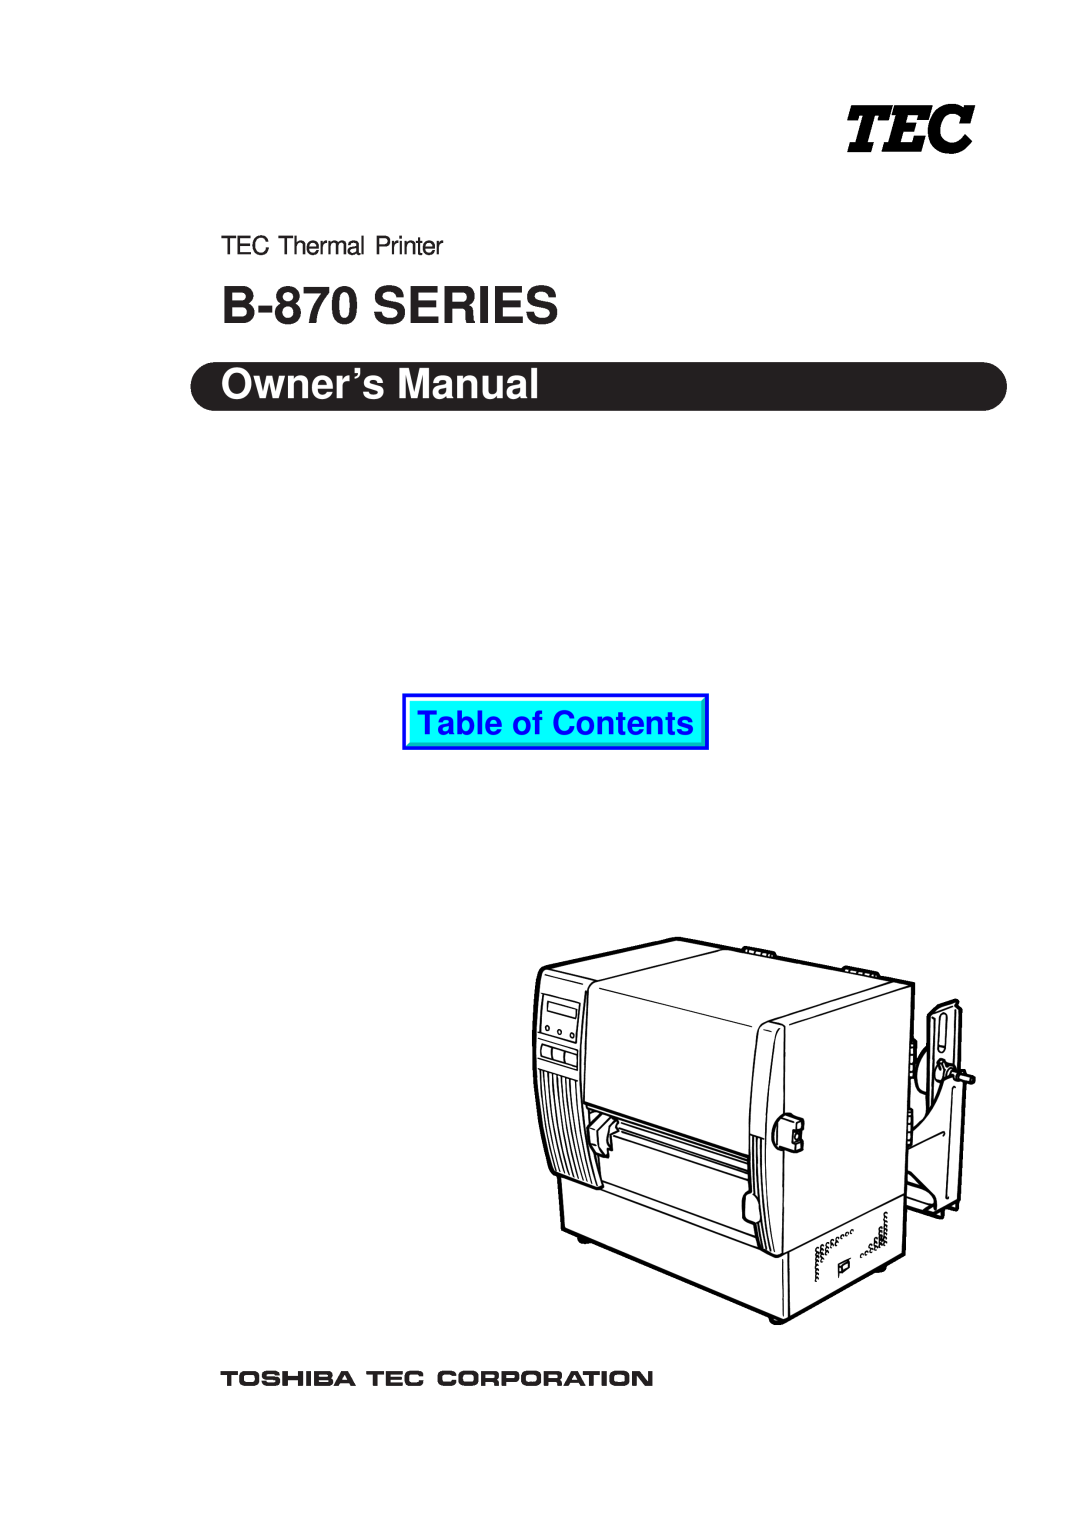 Toshiba EM1-33039EE owner manual B-870 SERIES, Owner’s Manual, Table of Contents, TEC Thermal Printer 